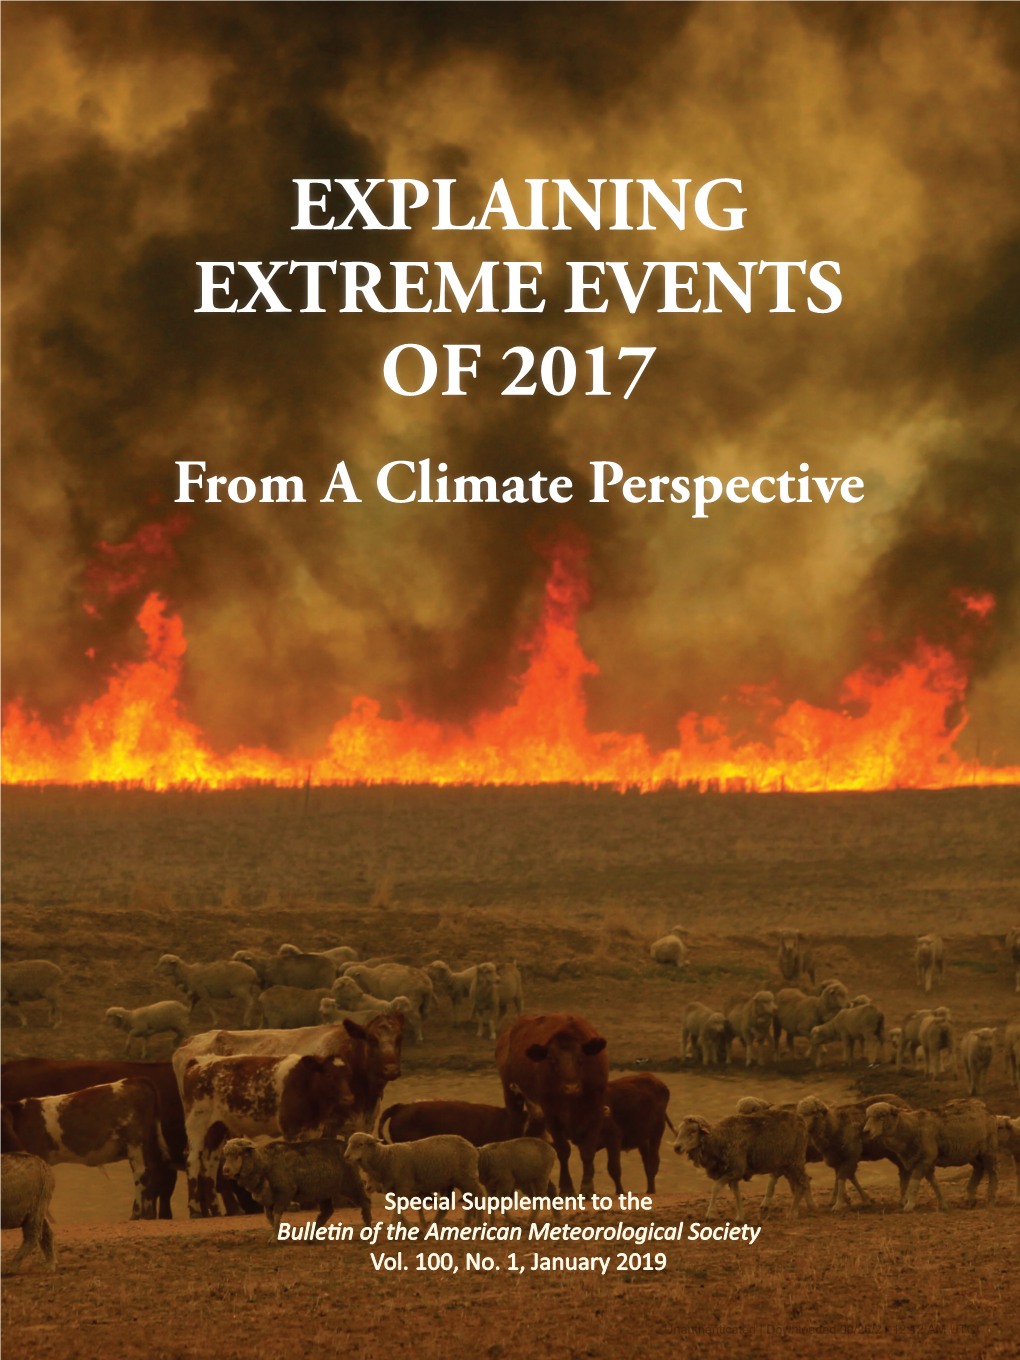 From a Climate Perspective